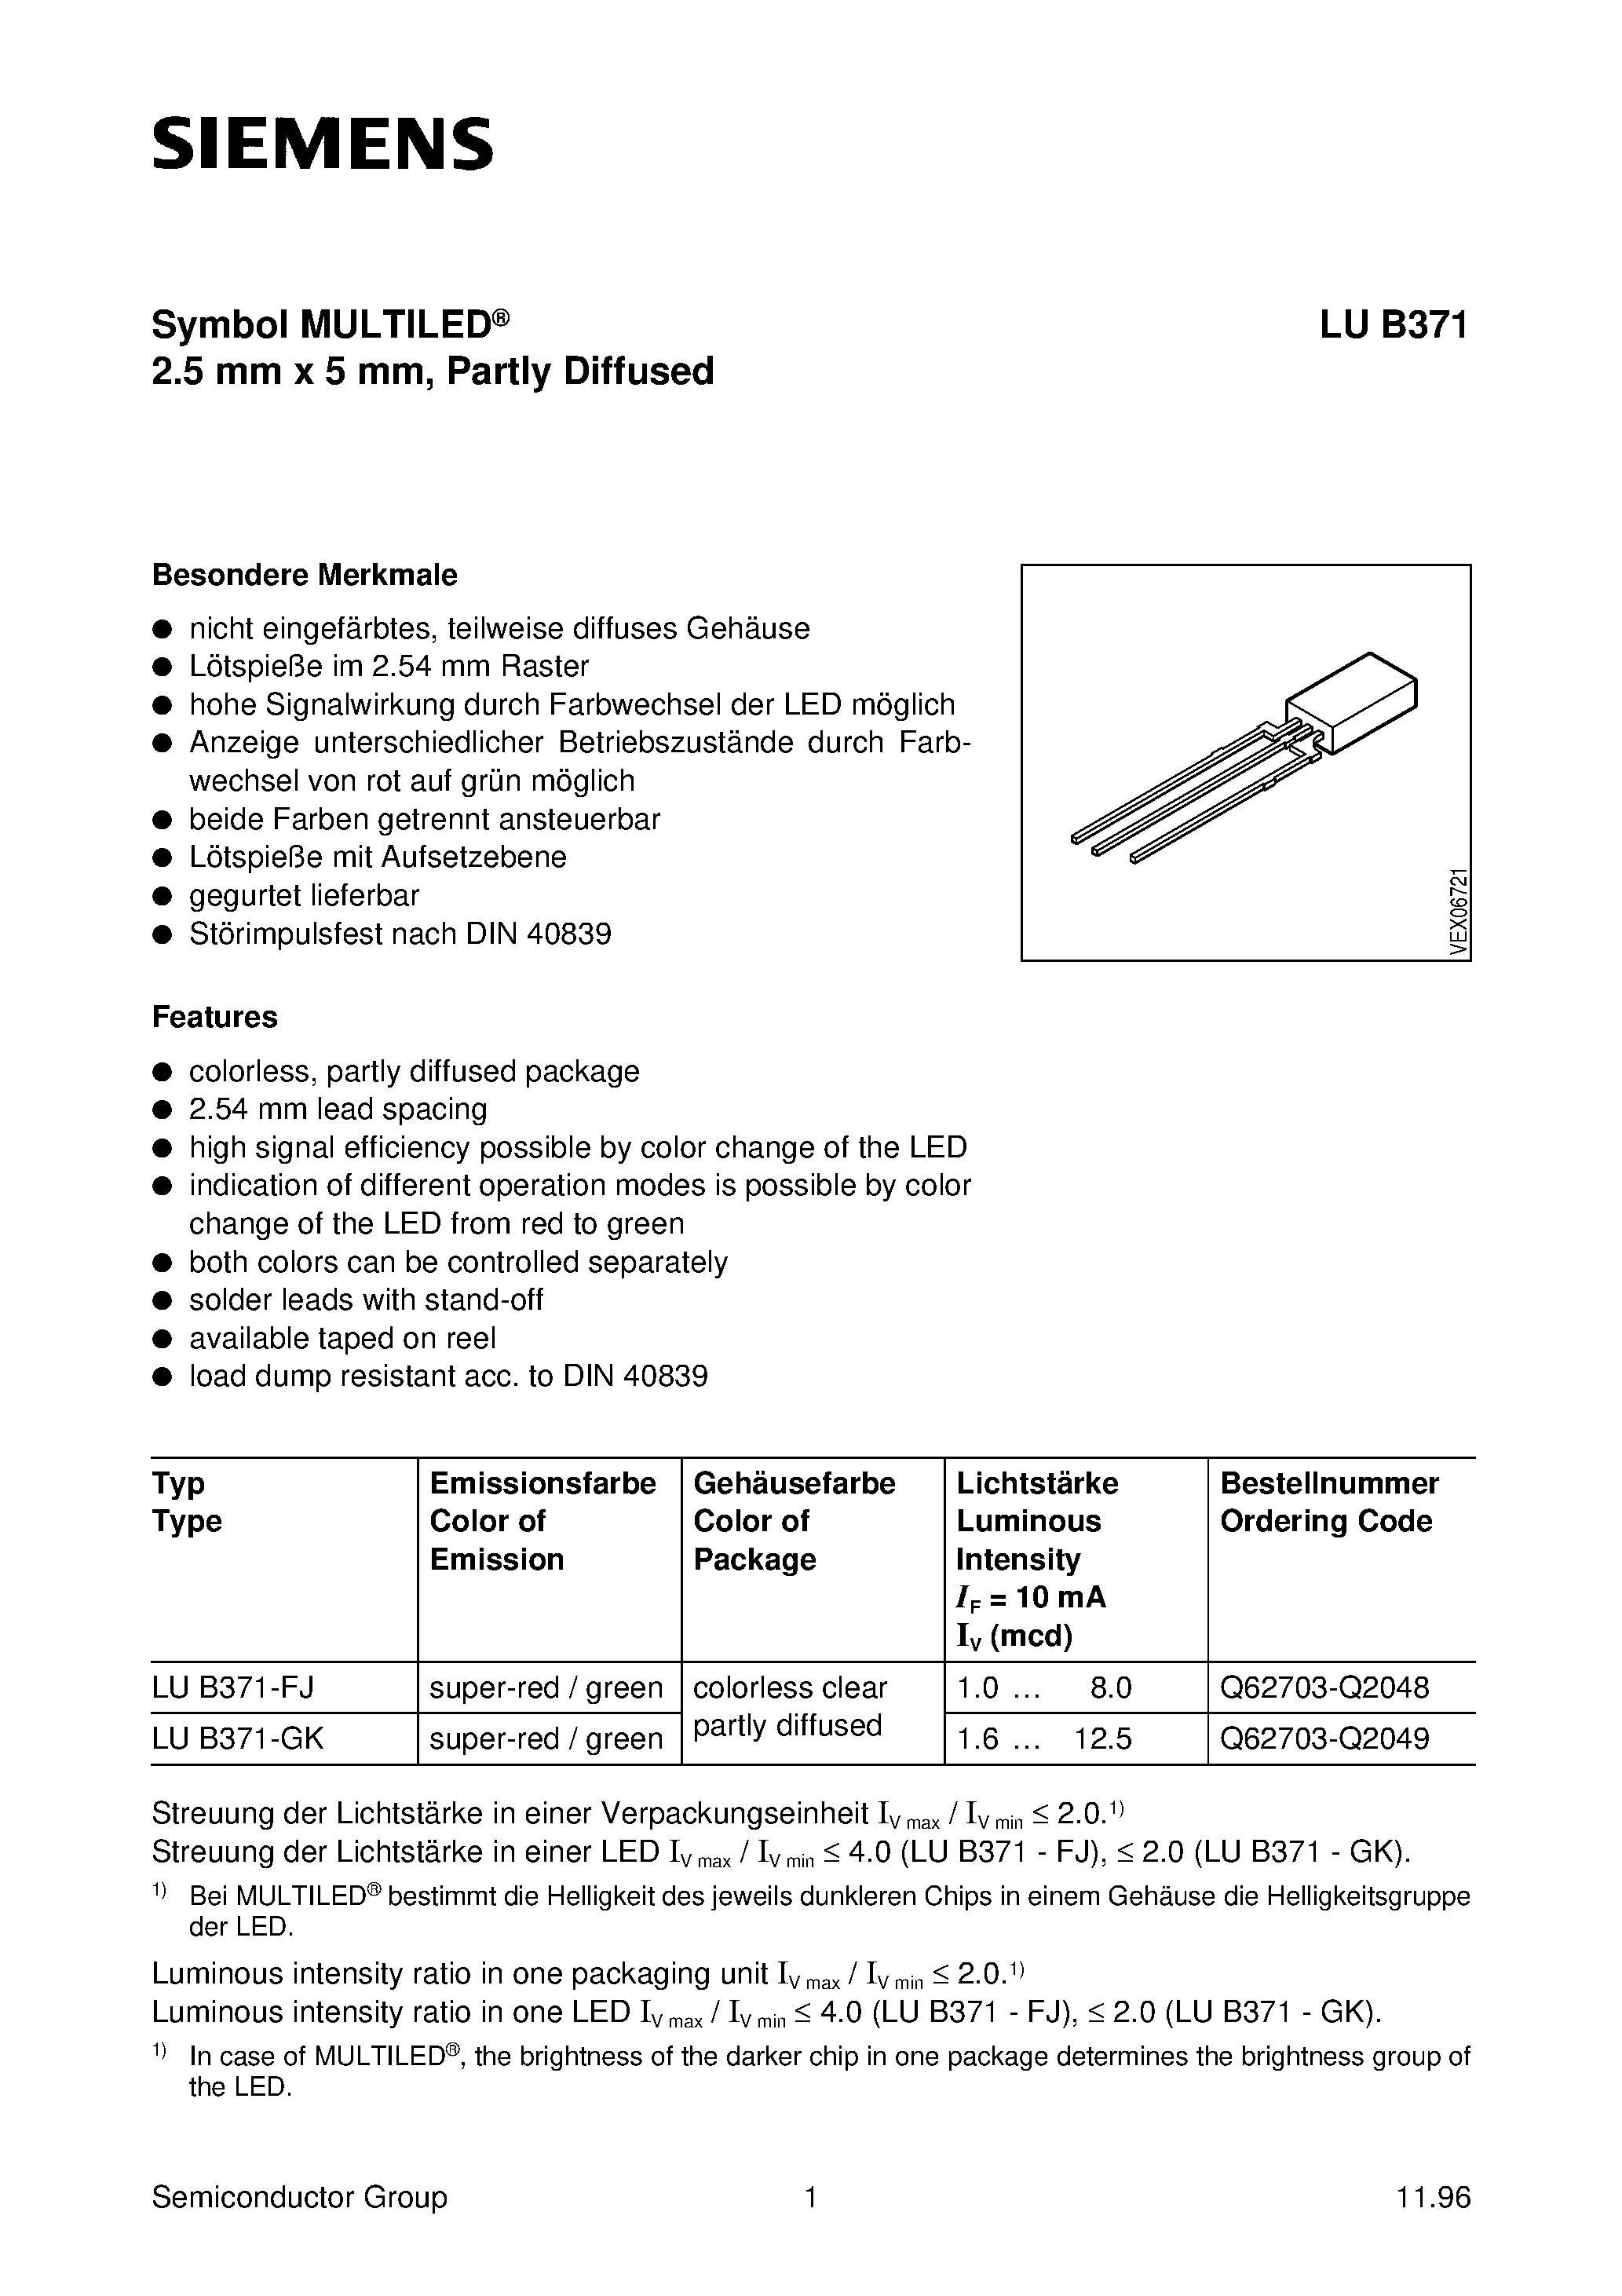 Datasheet LUB371-GK - Symbol MULTILED 2.5 mm x 5 mm/ Partly Diffused page 1